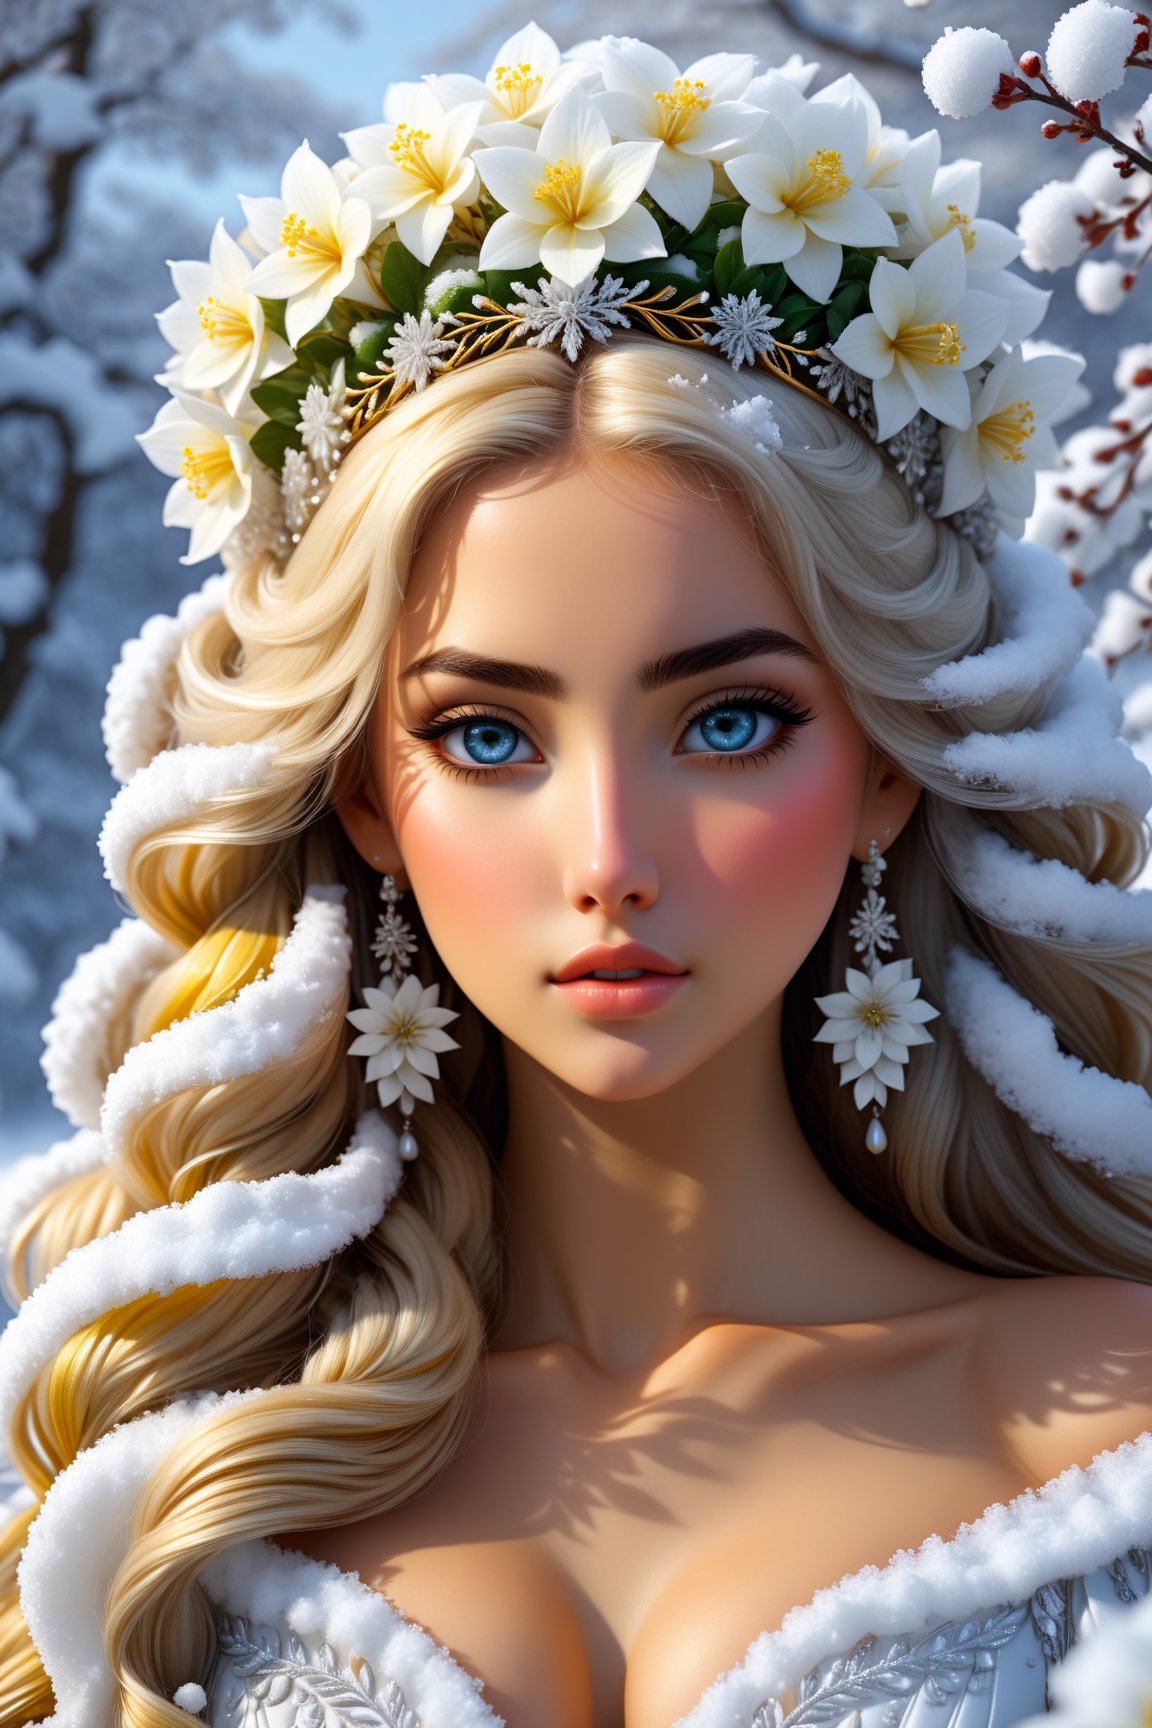 artstudt, (official art, extremely detailed CG unity 8k wallpaper),(1girl:1.3),beautifully detailed eyes, detailed fine nose, detailed fingers, (8k), (best quality), ( masterpiece:1.2), (realistic), ( photorealistic:1.37), extremely detailed 1 snow goddess, surrounded by white flowers and snow, wearing a gorgeous white dress with detailed ornaments on her head, extremely detailed, high quality skirt white hair, long hair, (no animal),Beautiful frost frost yellow winter queen soft Hawaiian flowers hyperdetailed portrait 8k Claude Monet
